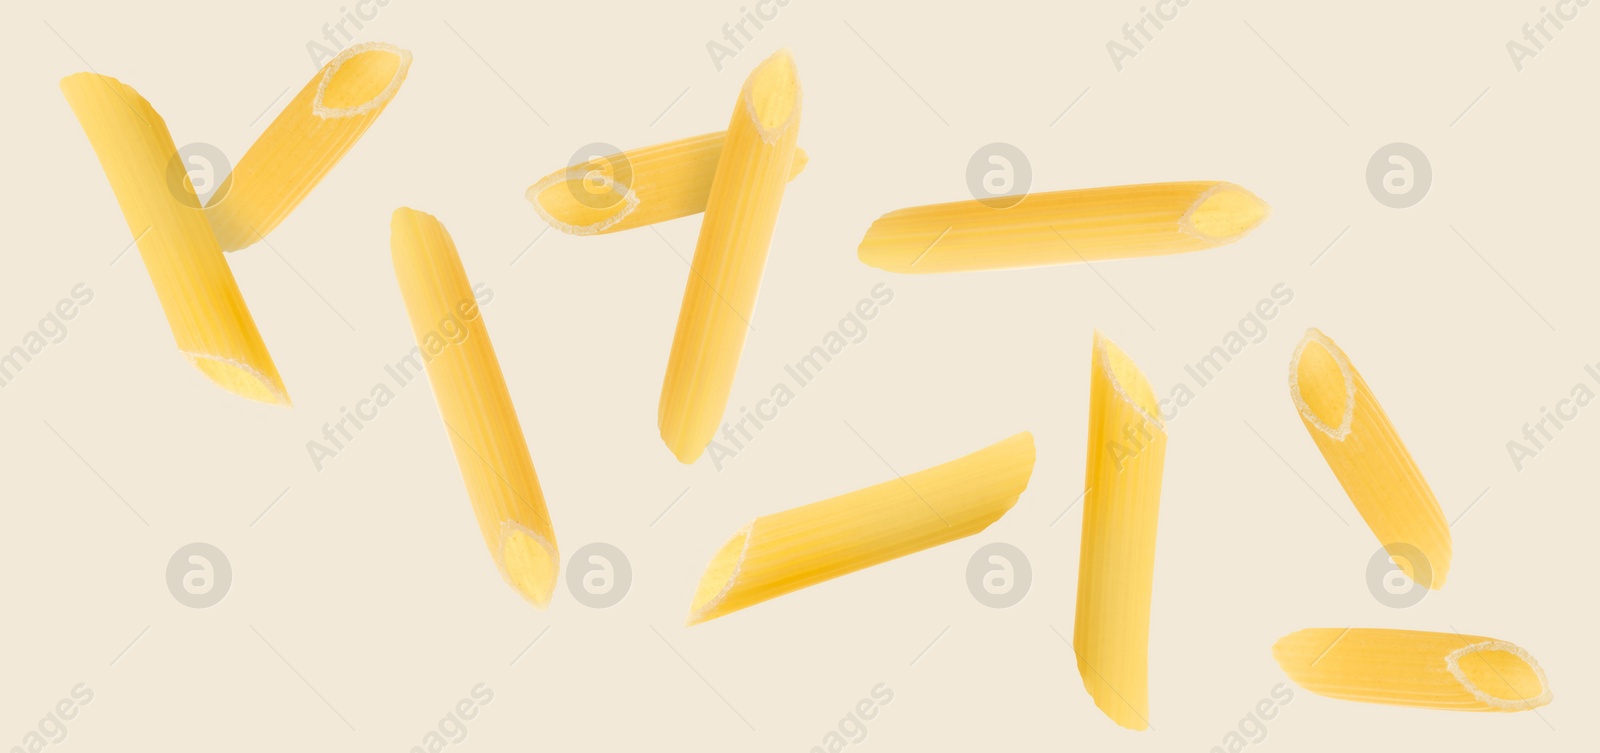 Image of Raw penne pasta flying on beige background